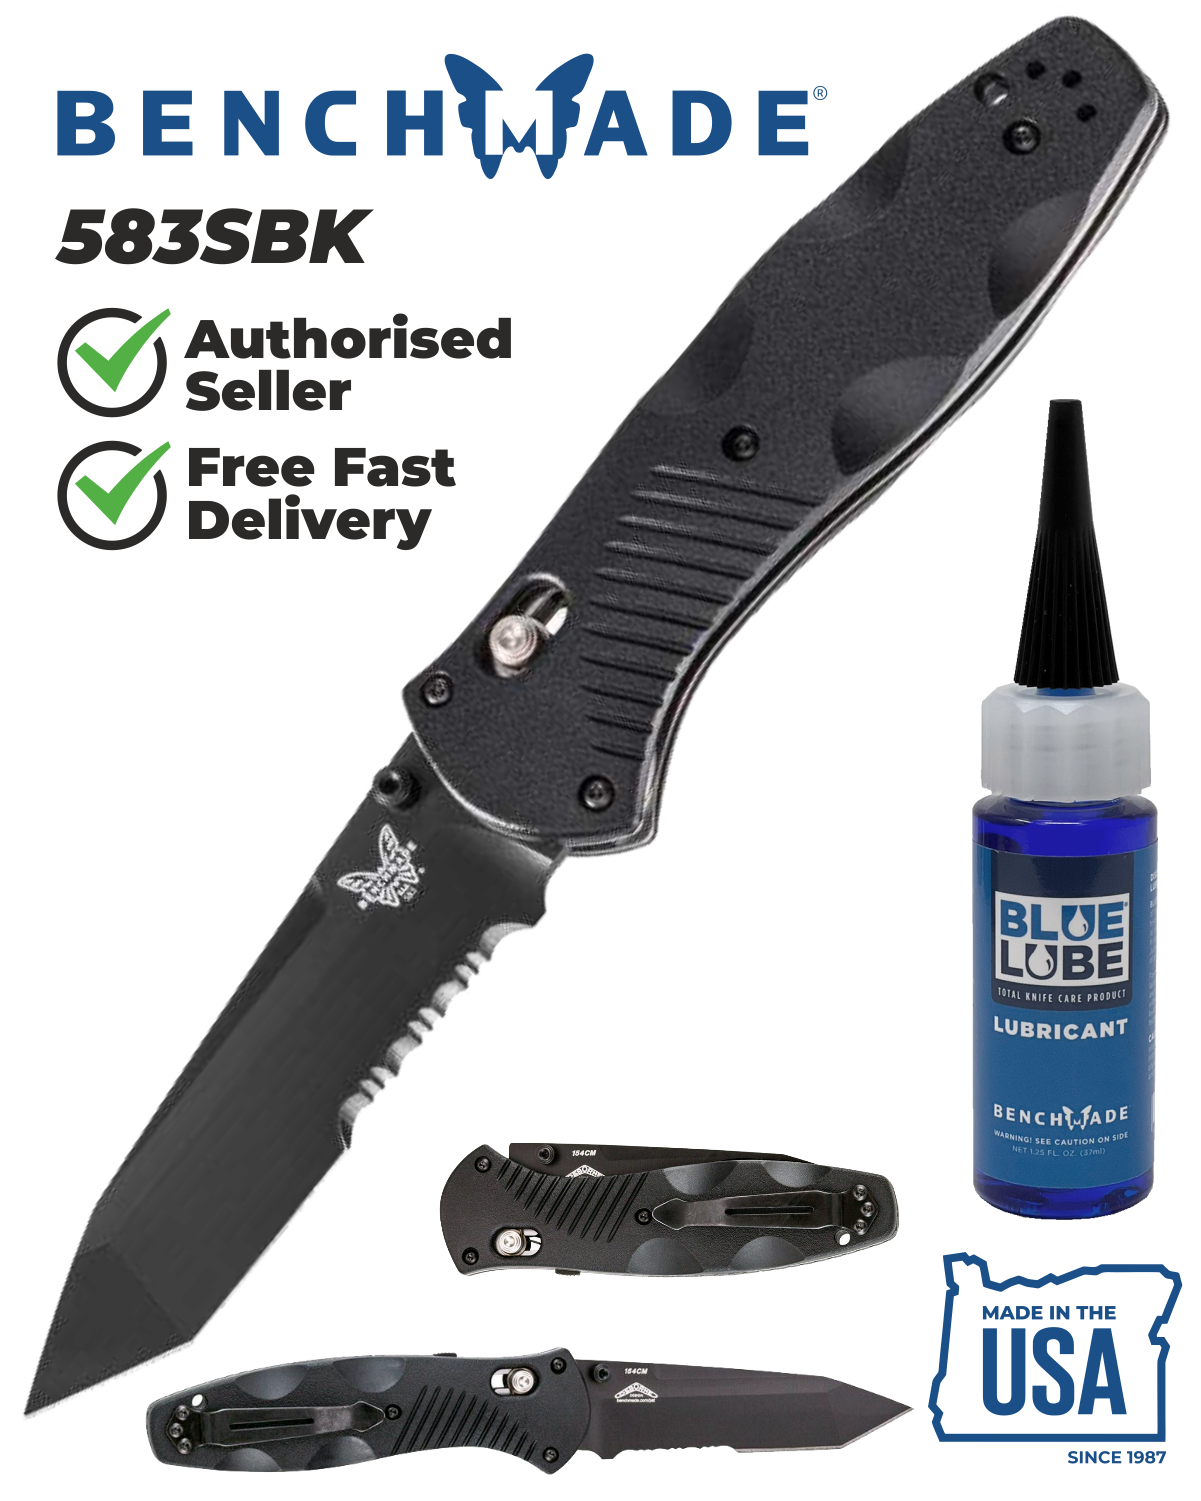  Benchmade Bluelube 1.25oz Knife Care Lubricant